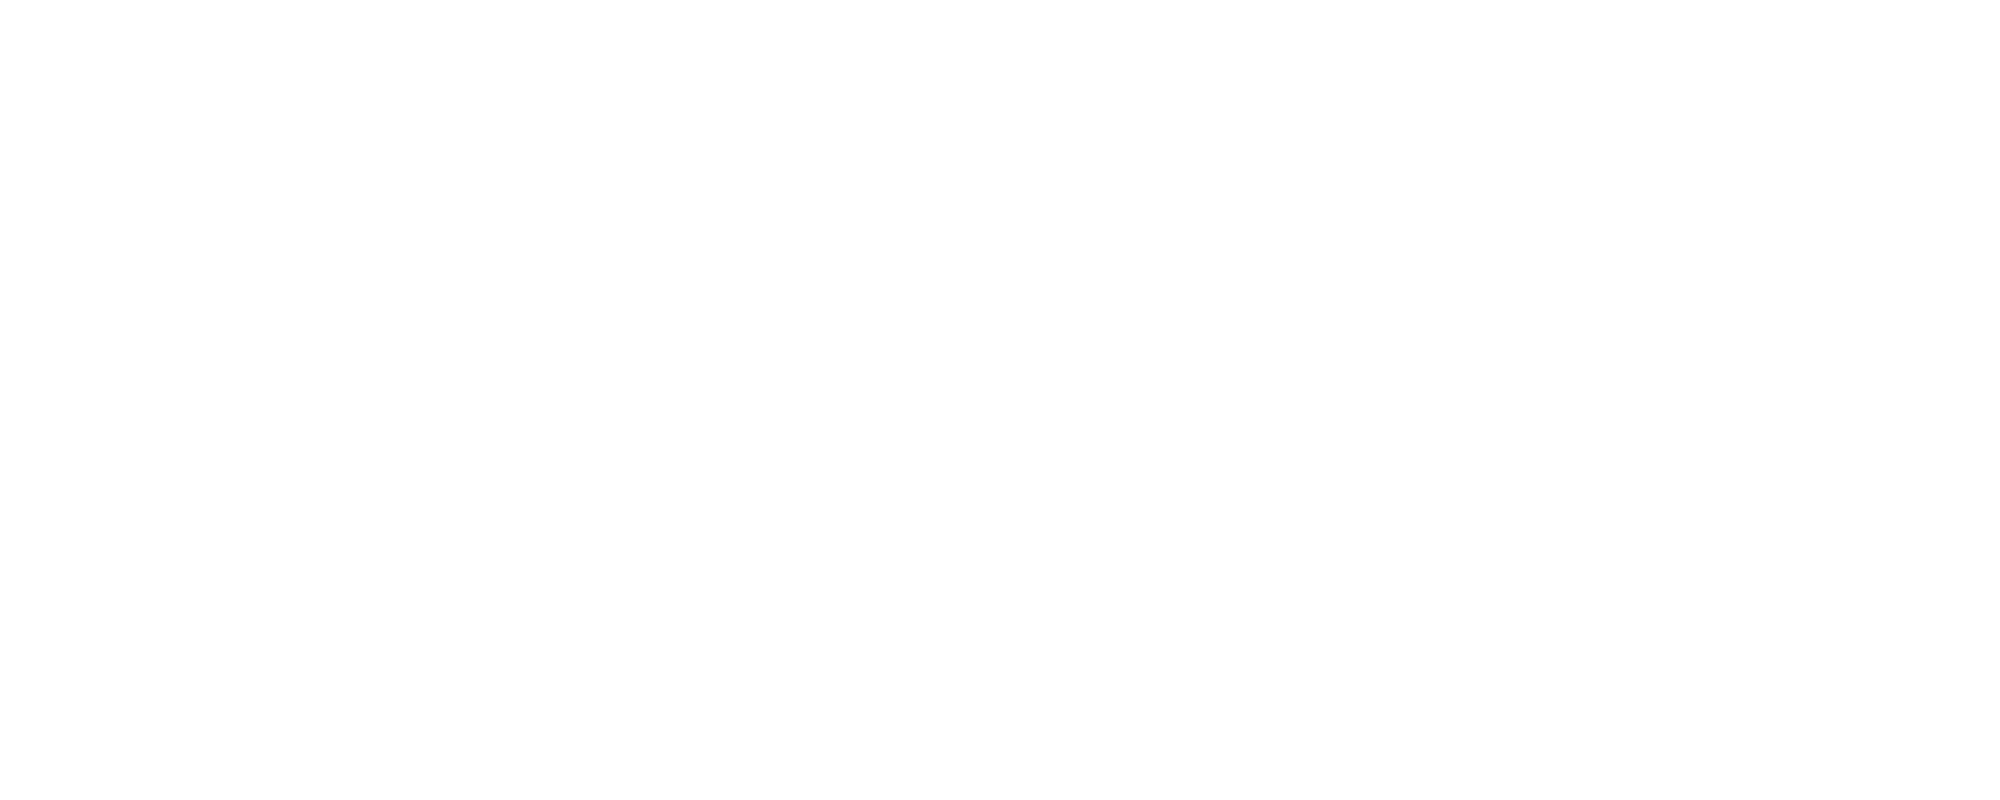 OVATION PUTS FOCUS ON EMPOWERED WOMEN, PICKS UP FIVE LIFETIME® TV MOVIES IN DEAL WITH A+E NETWORKS INTERNATIONAL